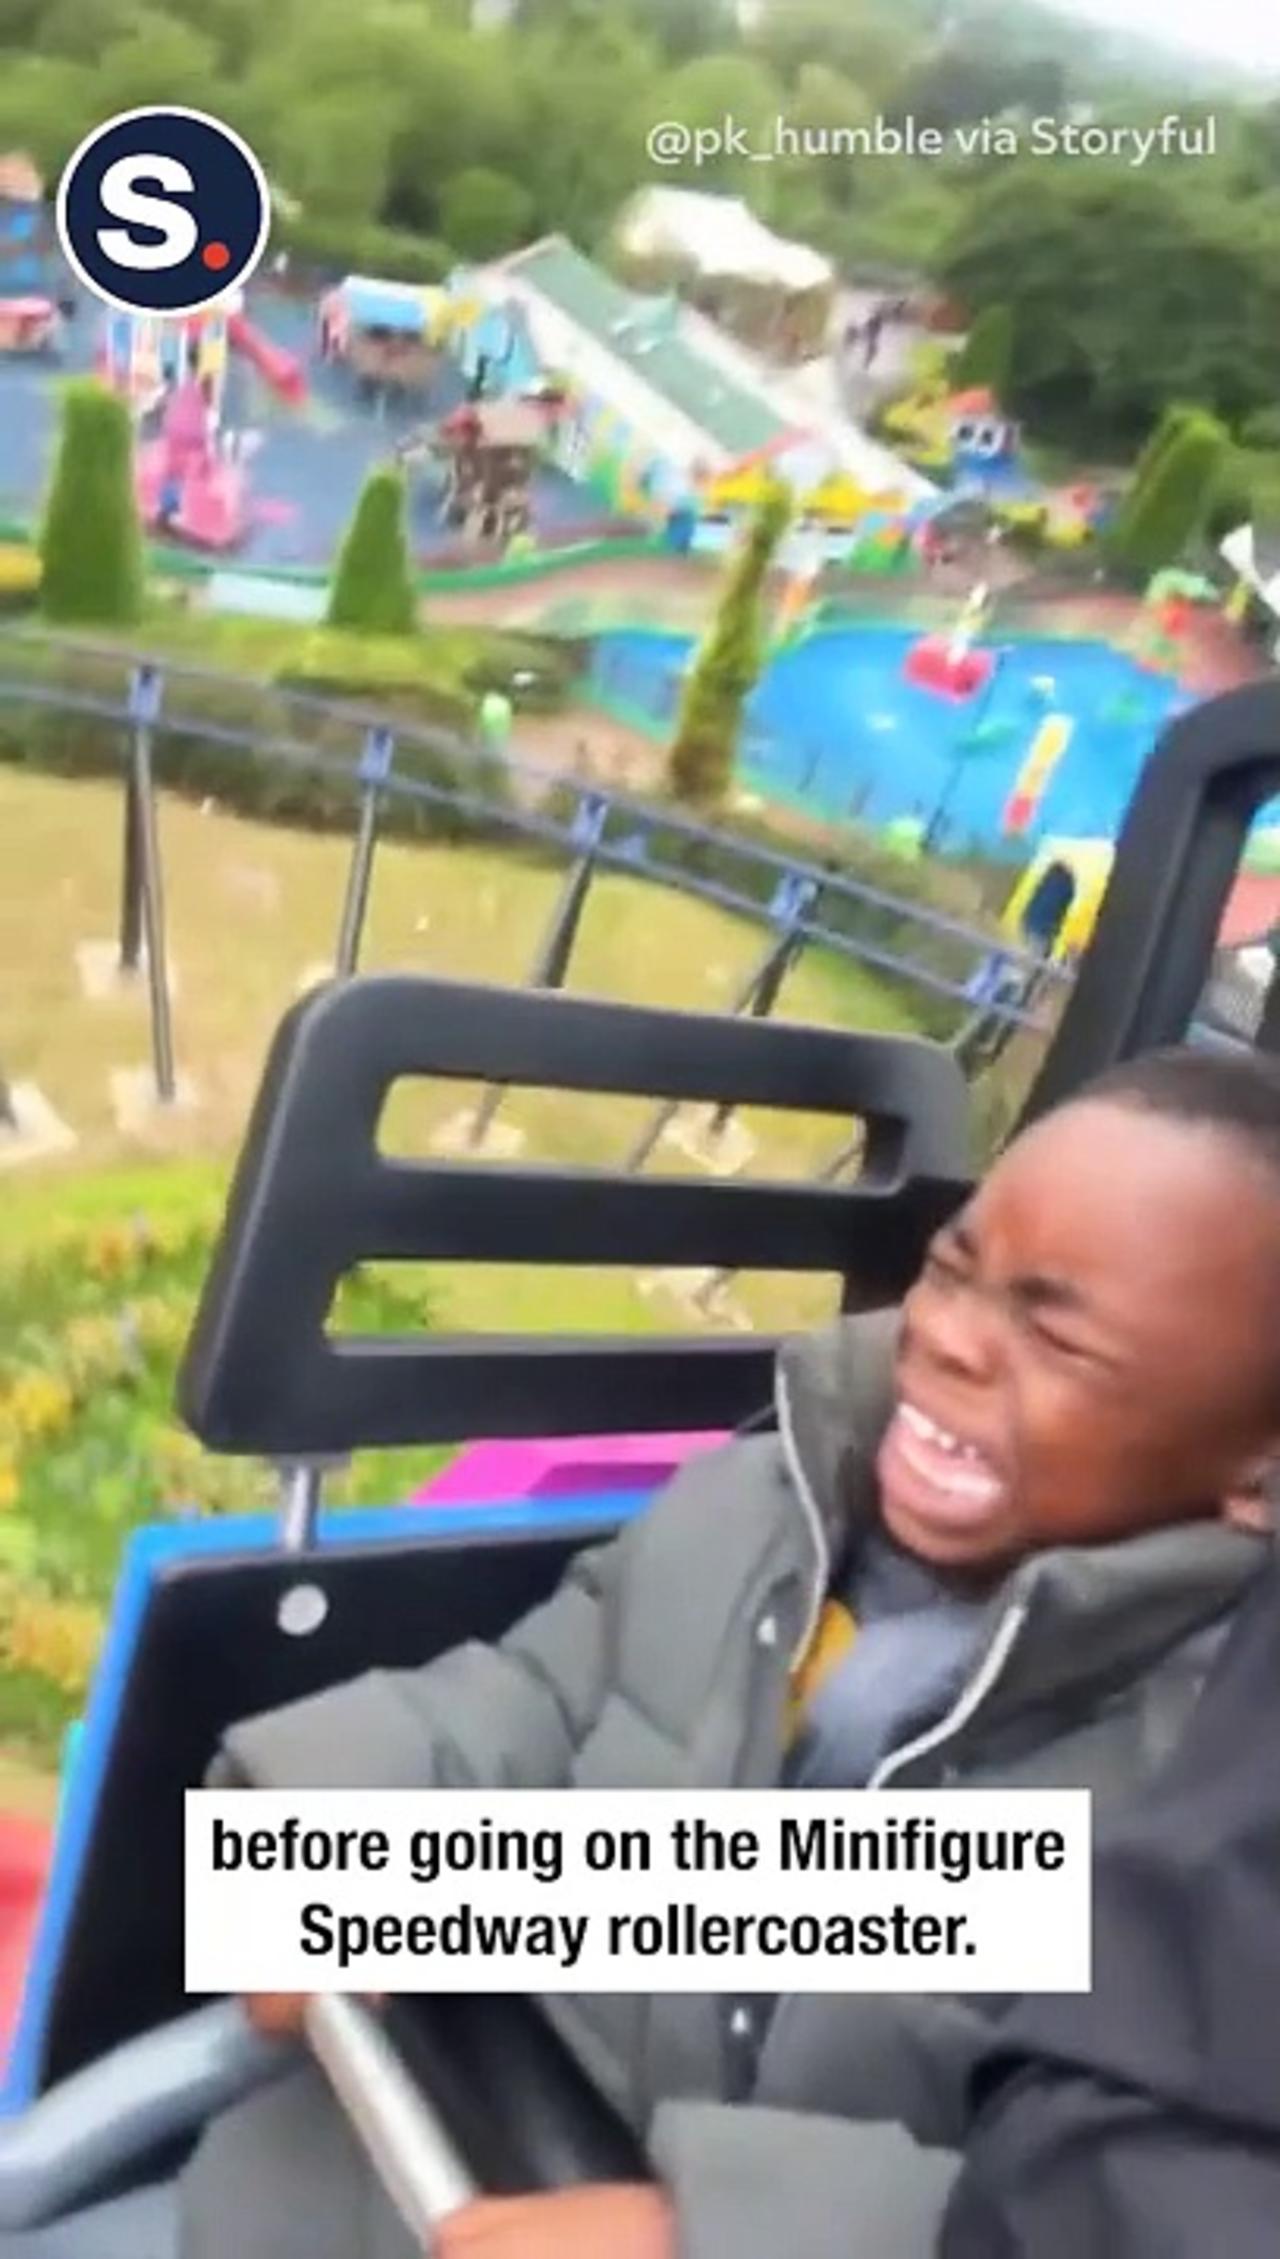 Emotional Rollercoaster as Kid Tries Out Legoland Ride